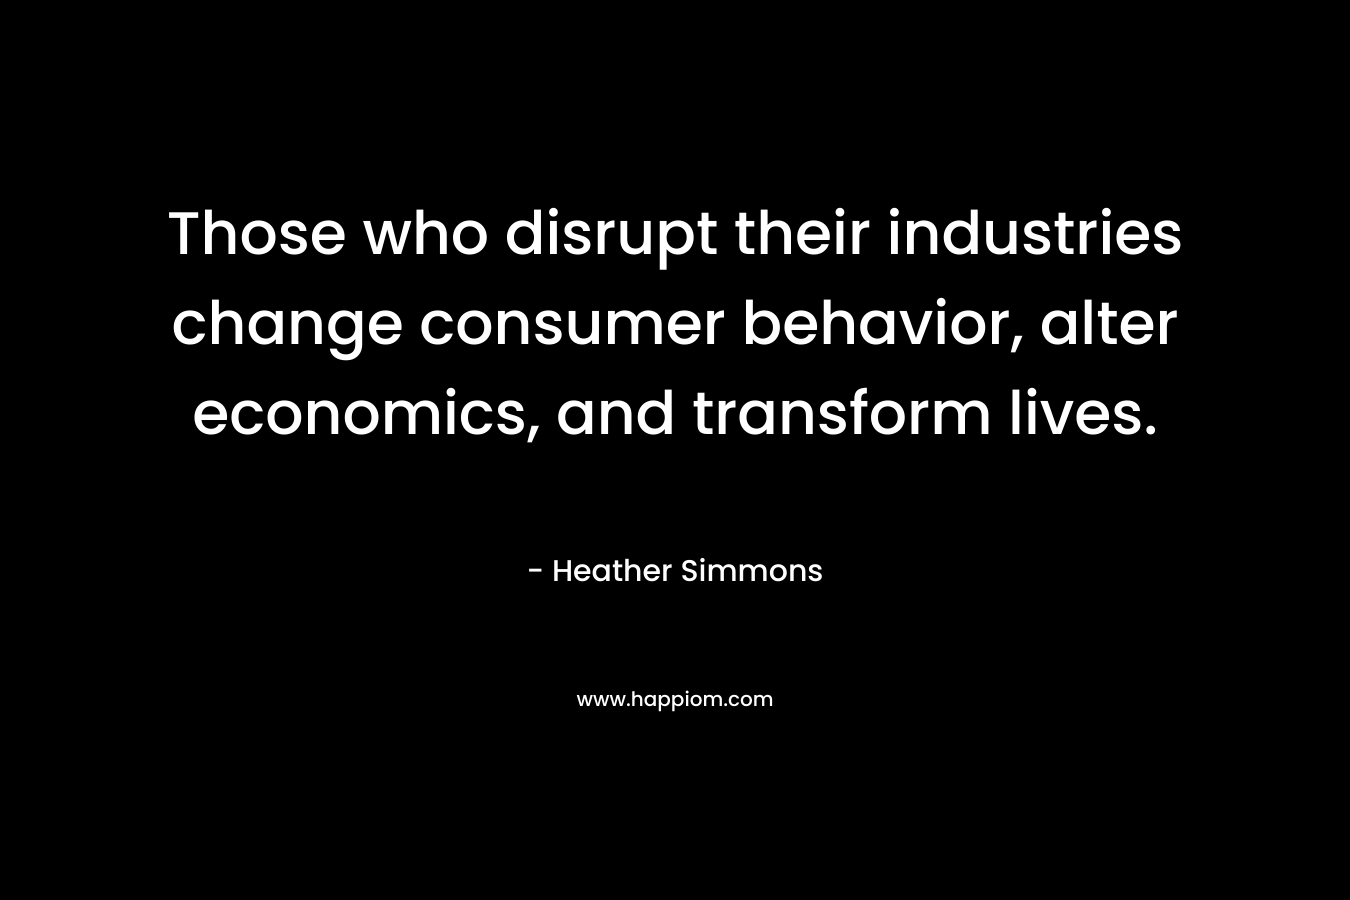 Those who disrupt their industries change consumer behavior, alter economics, and transform lives. – Heather Simmons